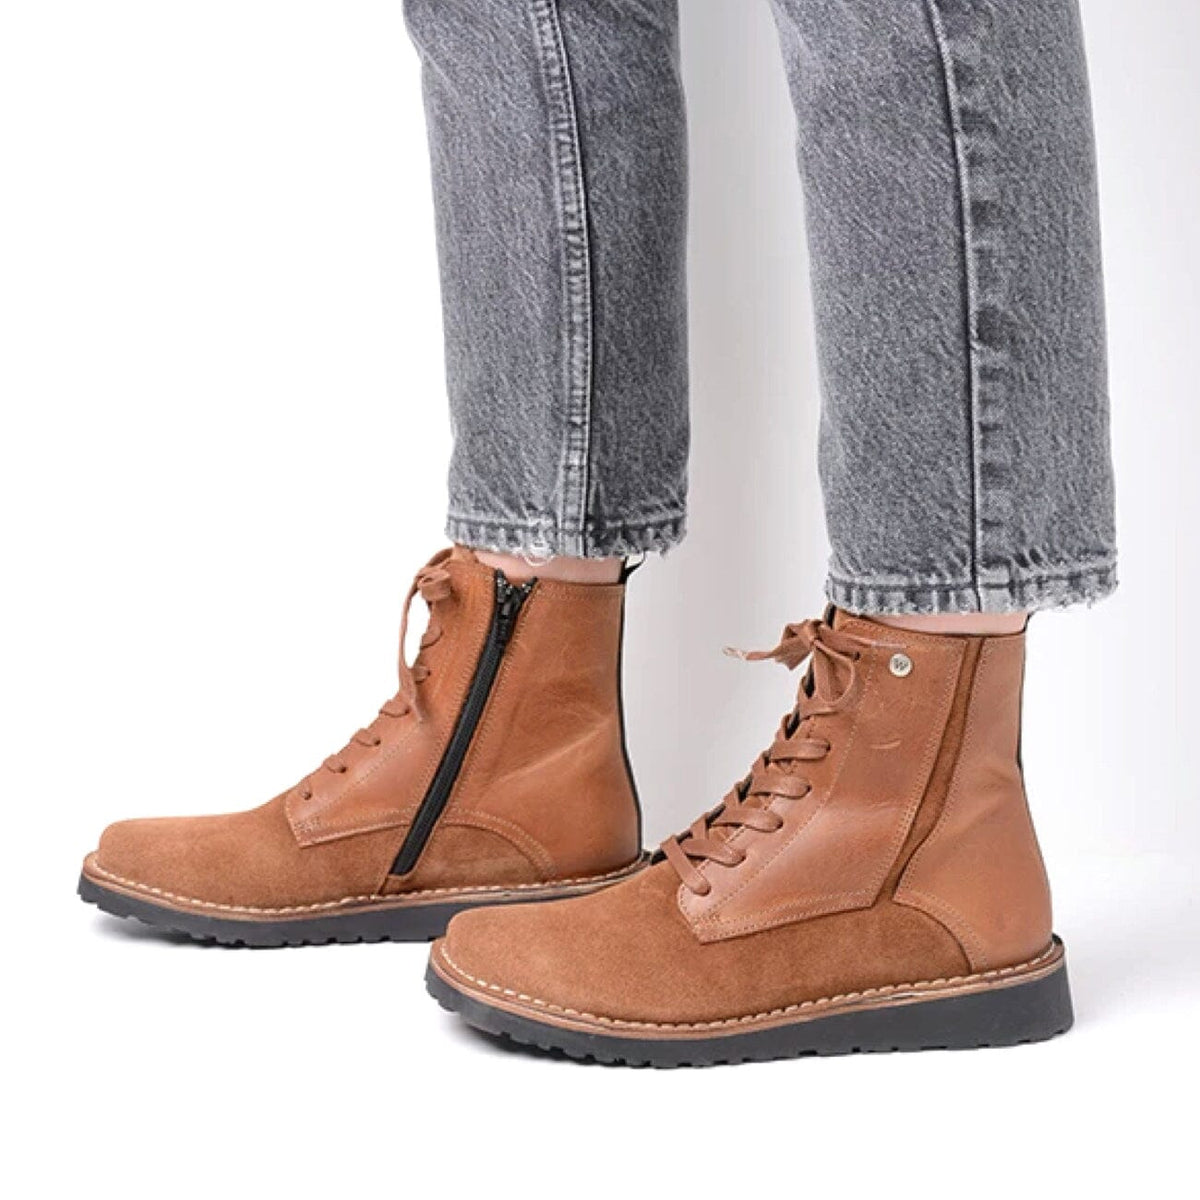 Wolky, Wagga Wagga, Boots, Suede Leather, Cognac Boots Wolky 